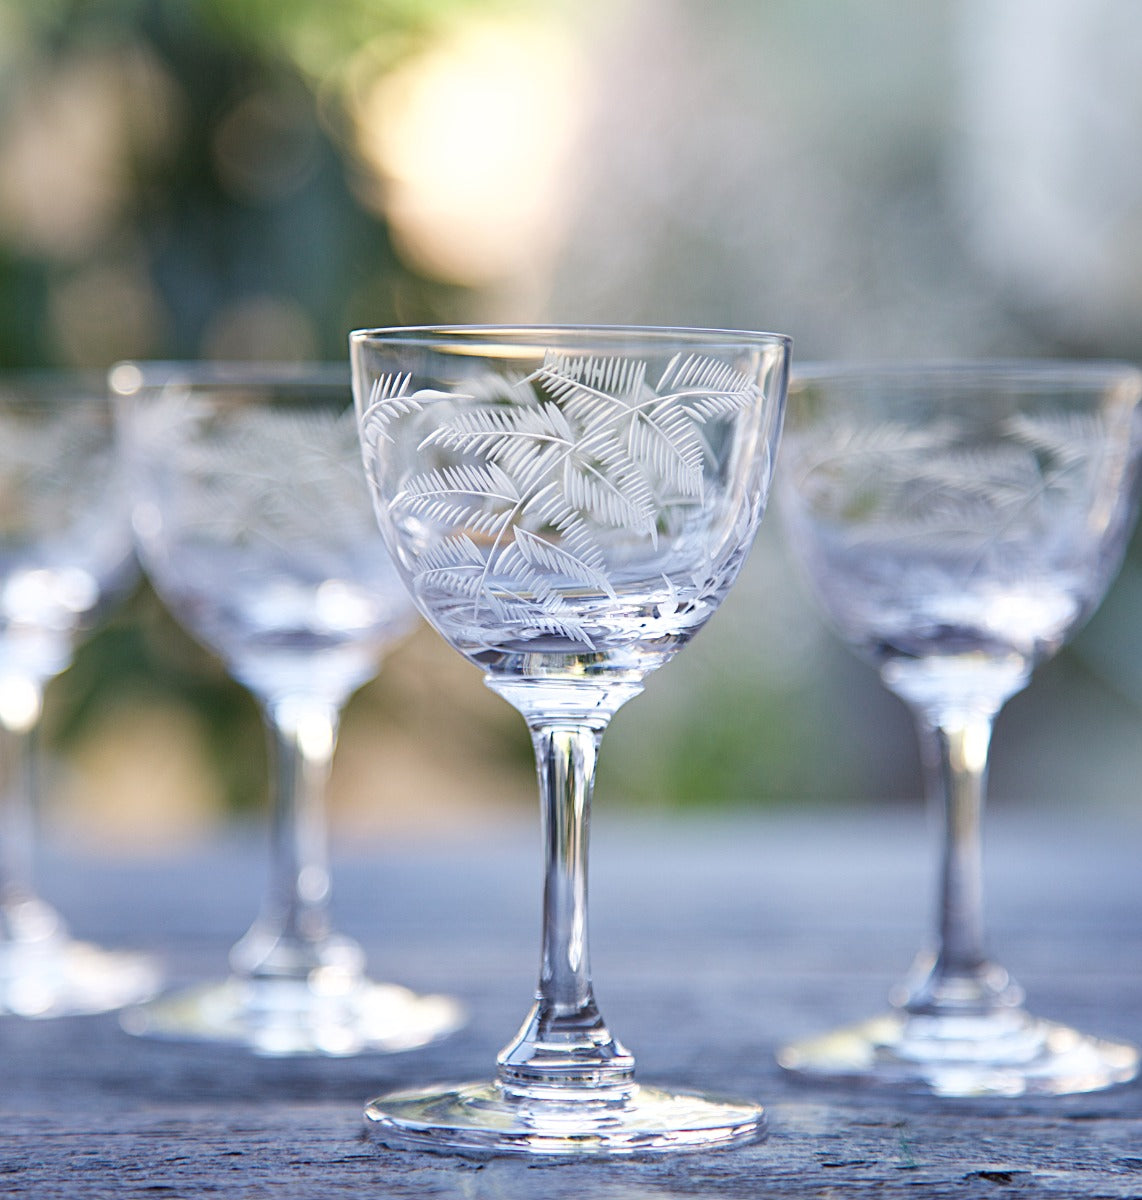 Set of 6 Crystal Liquer Glasses with Fern Design